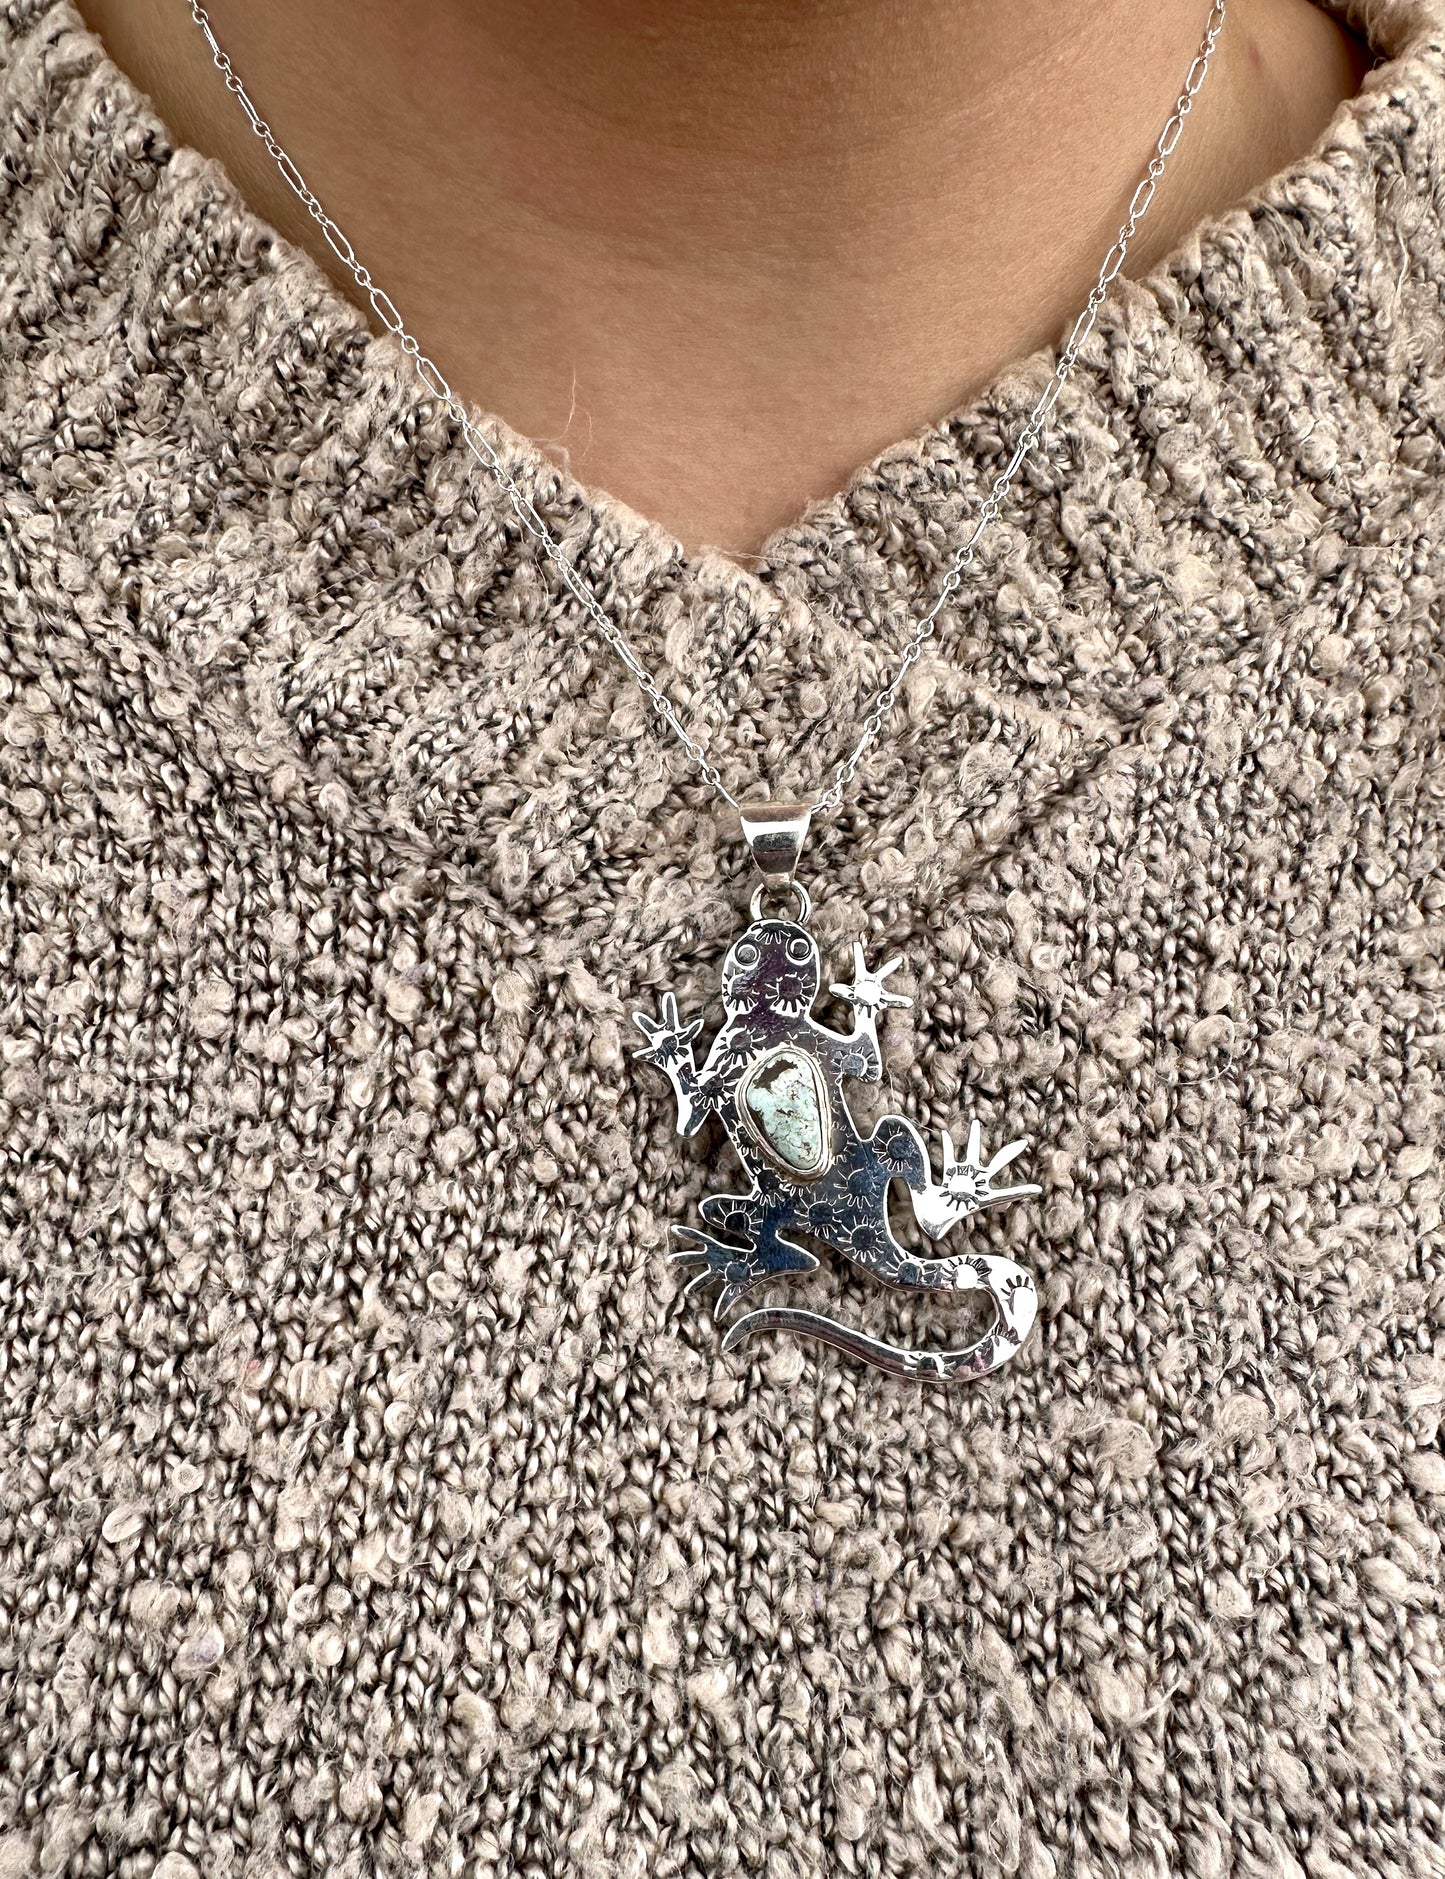 Dry Creek Lizard with matrix Necklace from the Rodgers Collection